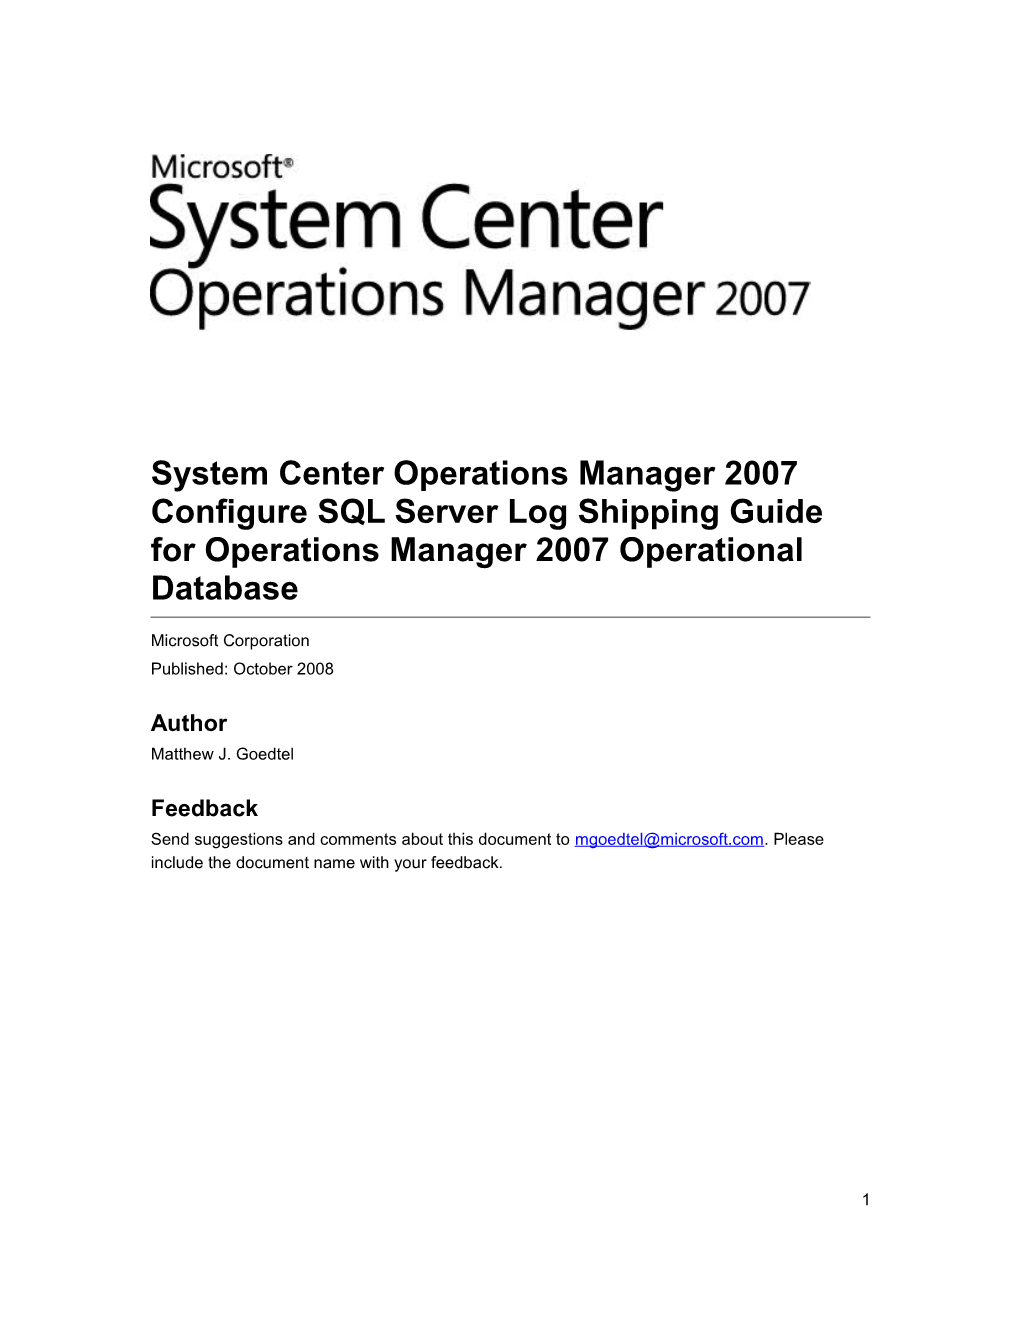 System Center Operations Manager 2007 Configure SQL Server Log Shipping Guide for Operations